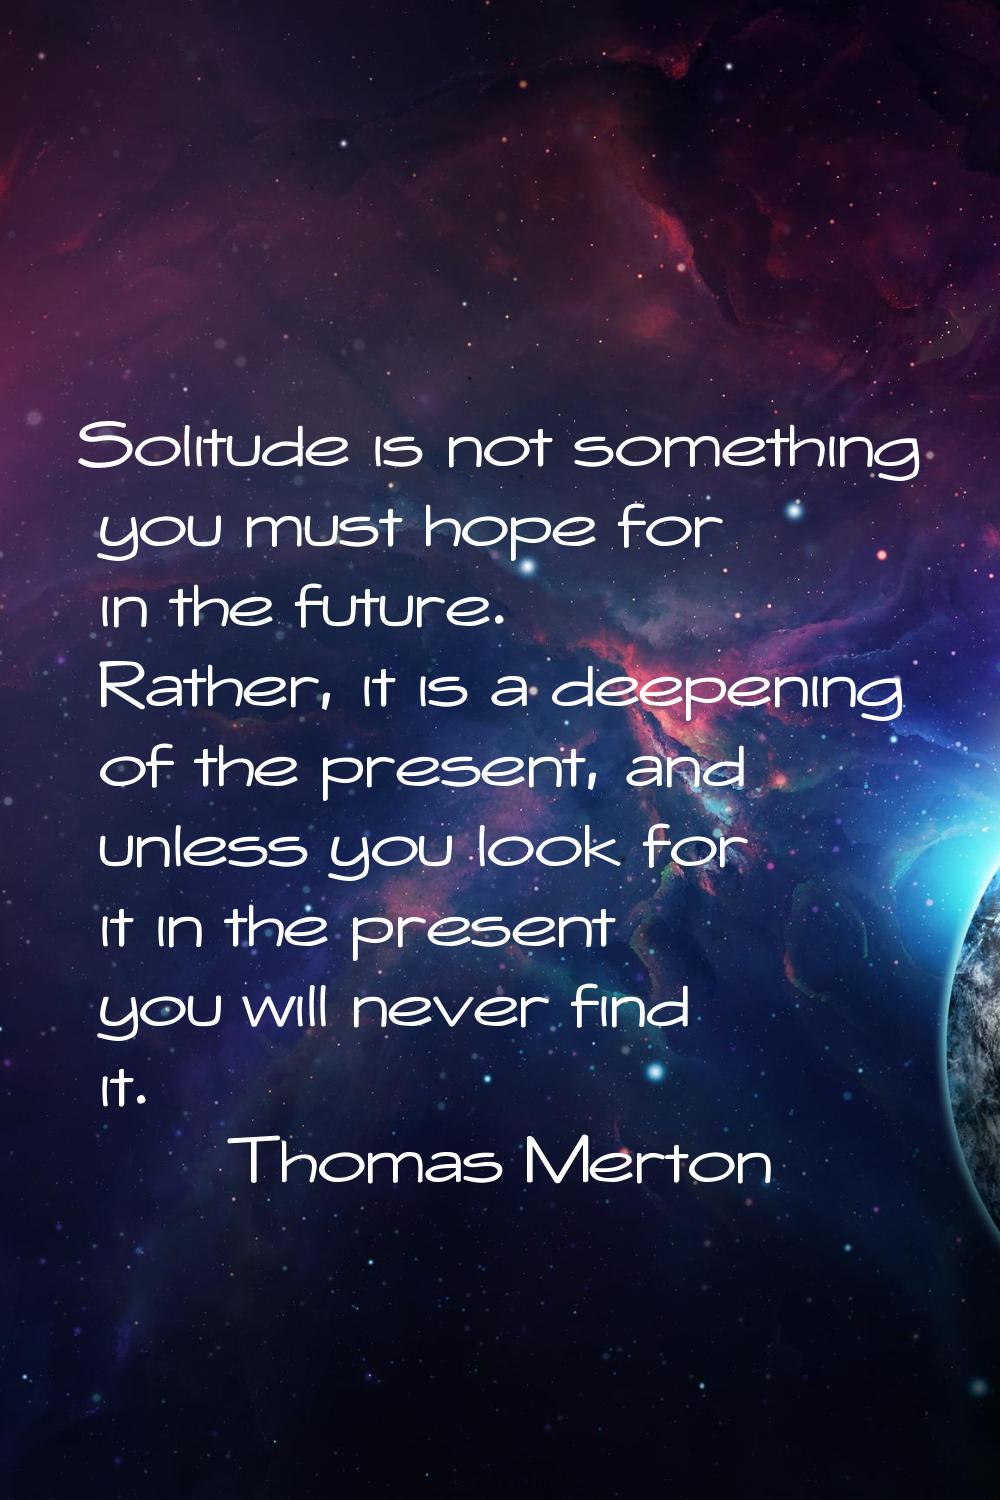 Solitude is not something you must hope for in the future. Rather, it is a deepening of the present